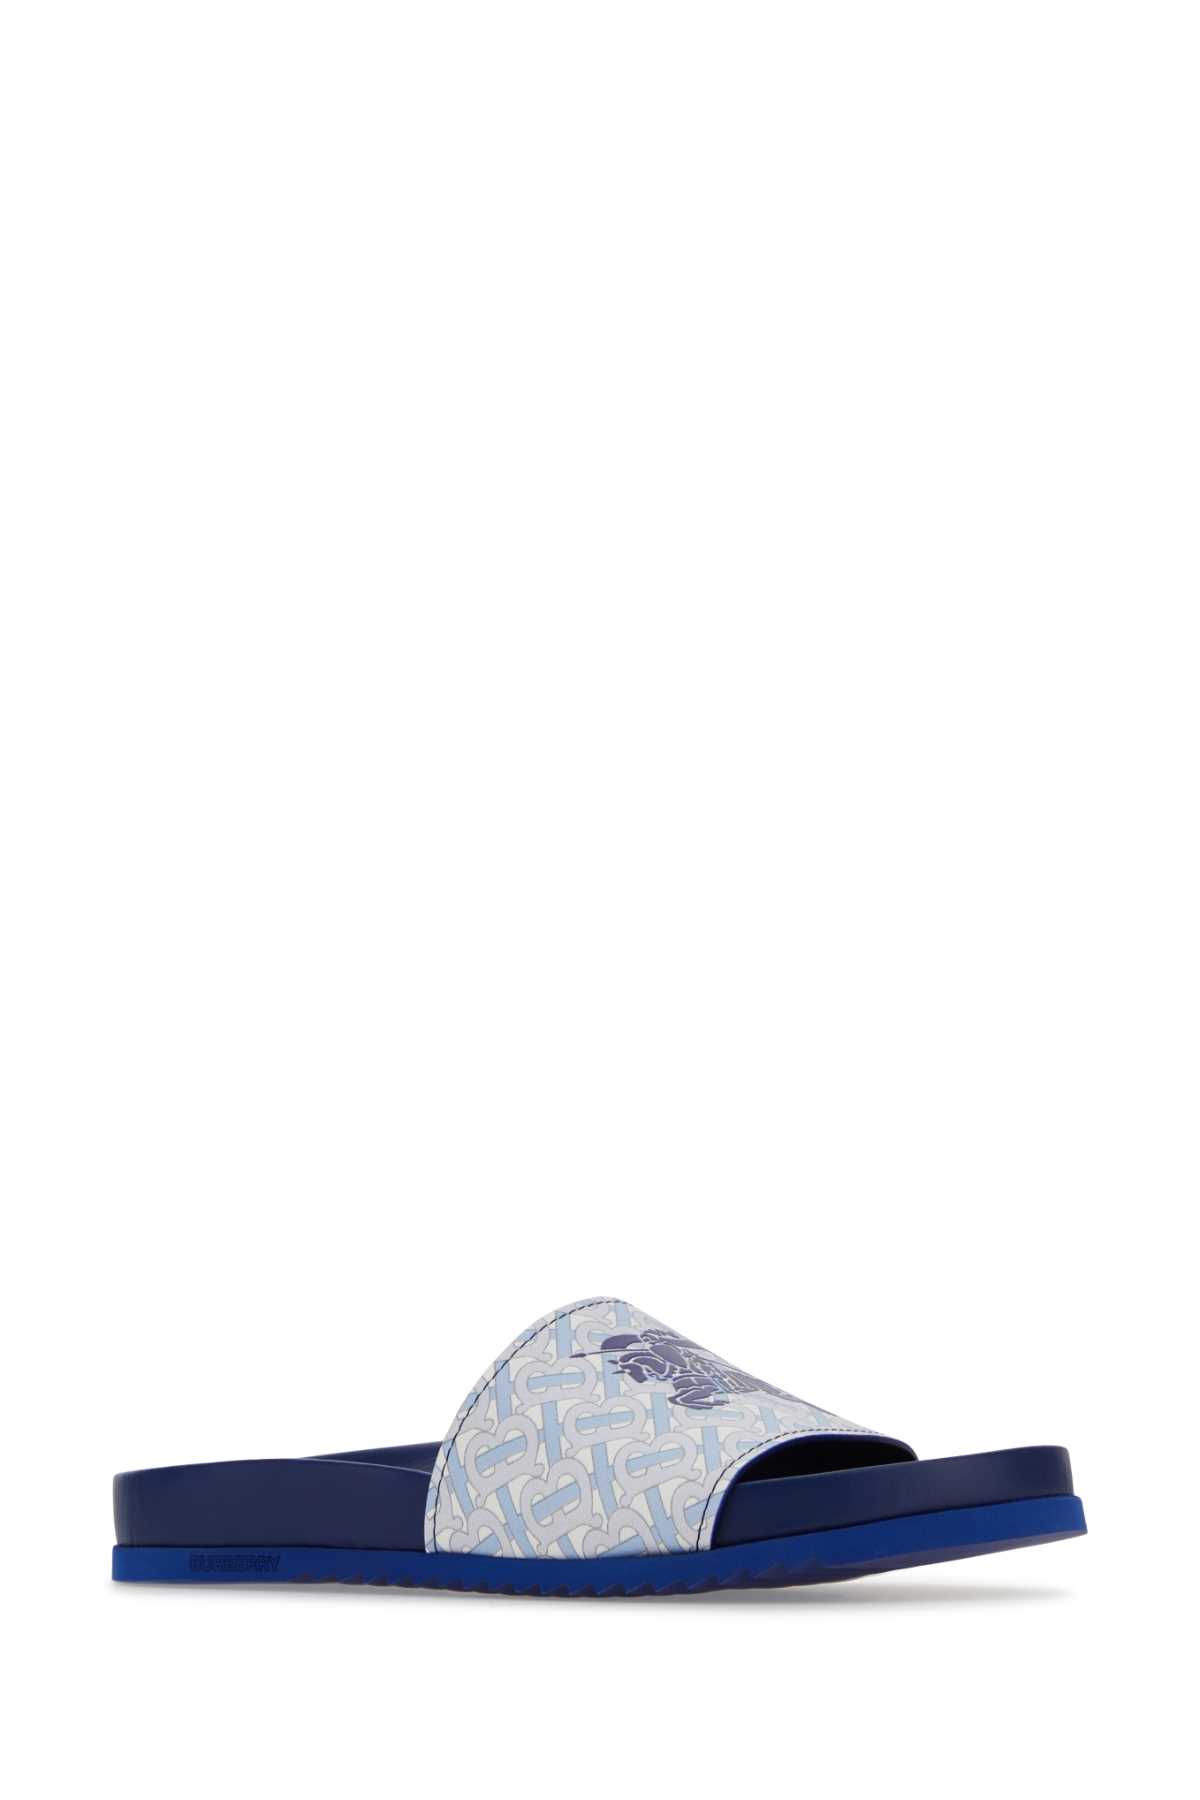 Shop Burberry Printed Leather Slippers In Paleblueippat